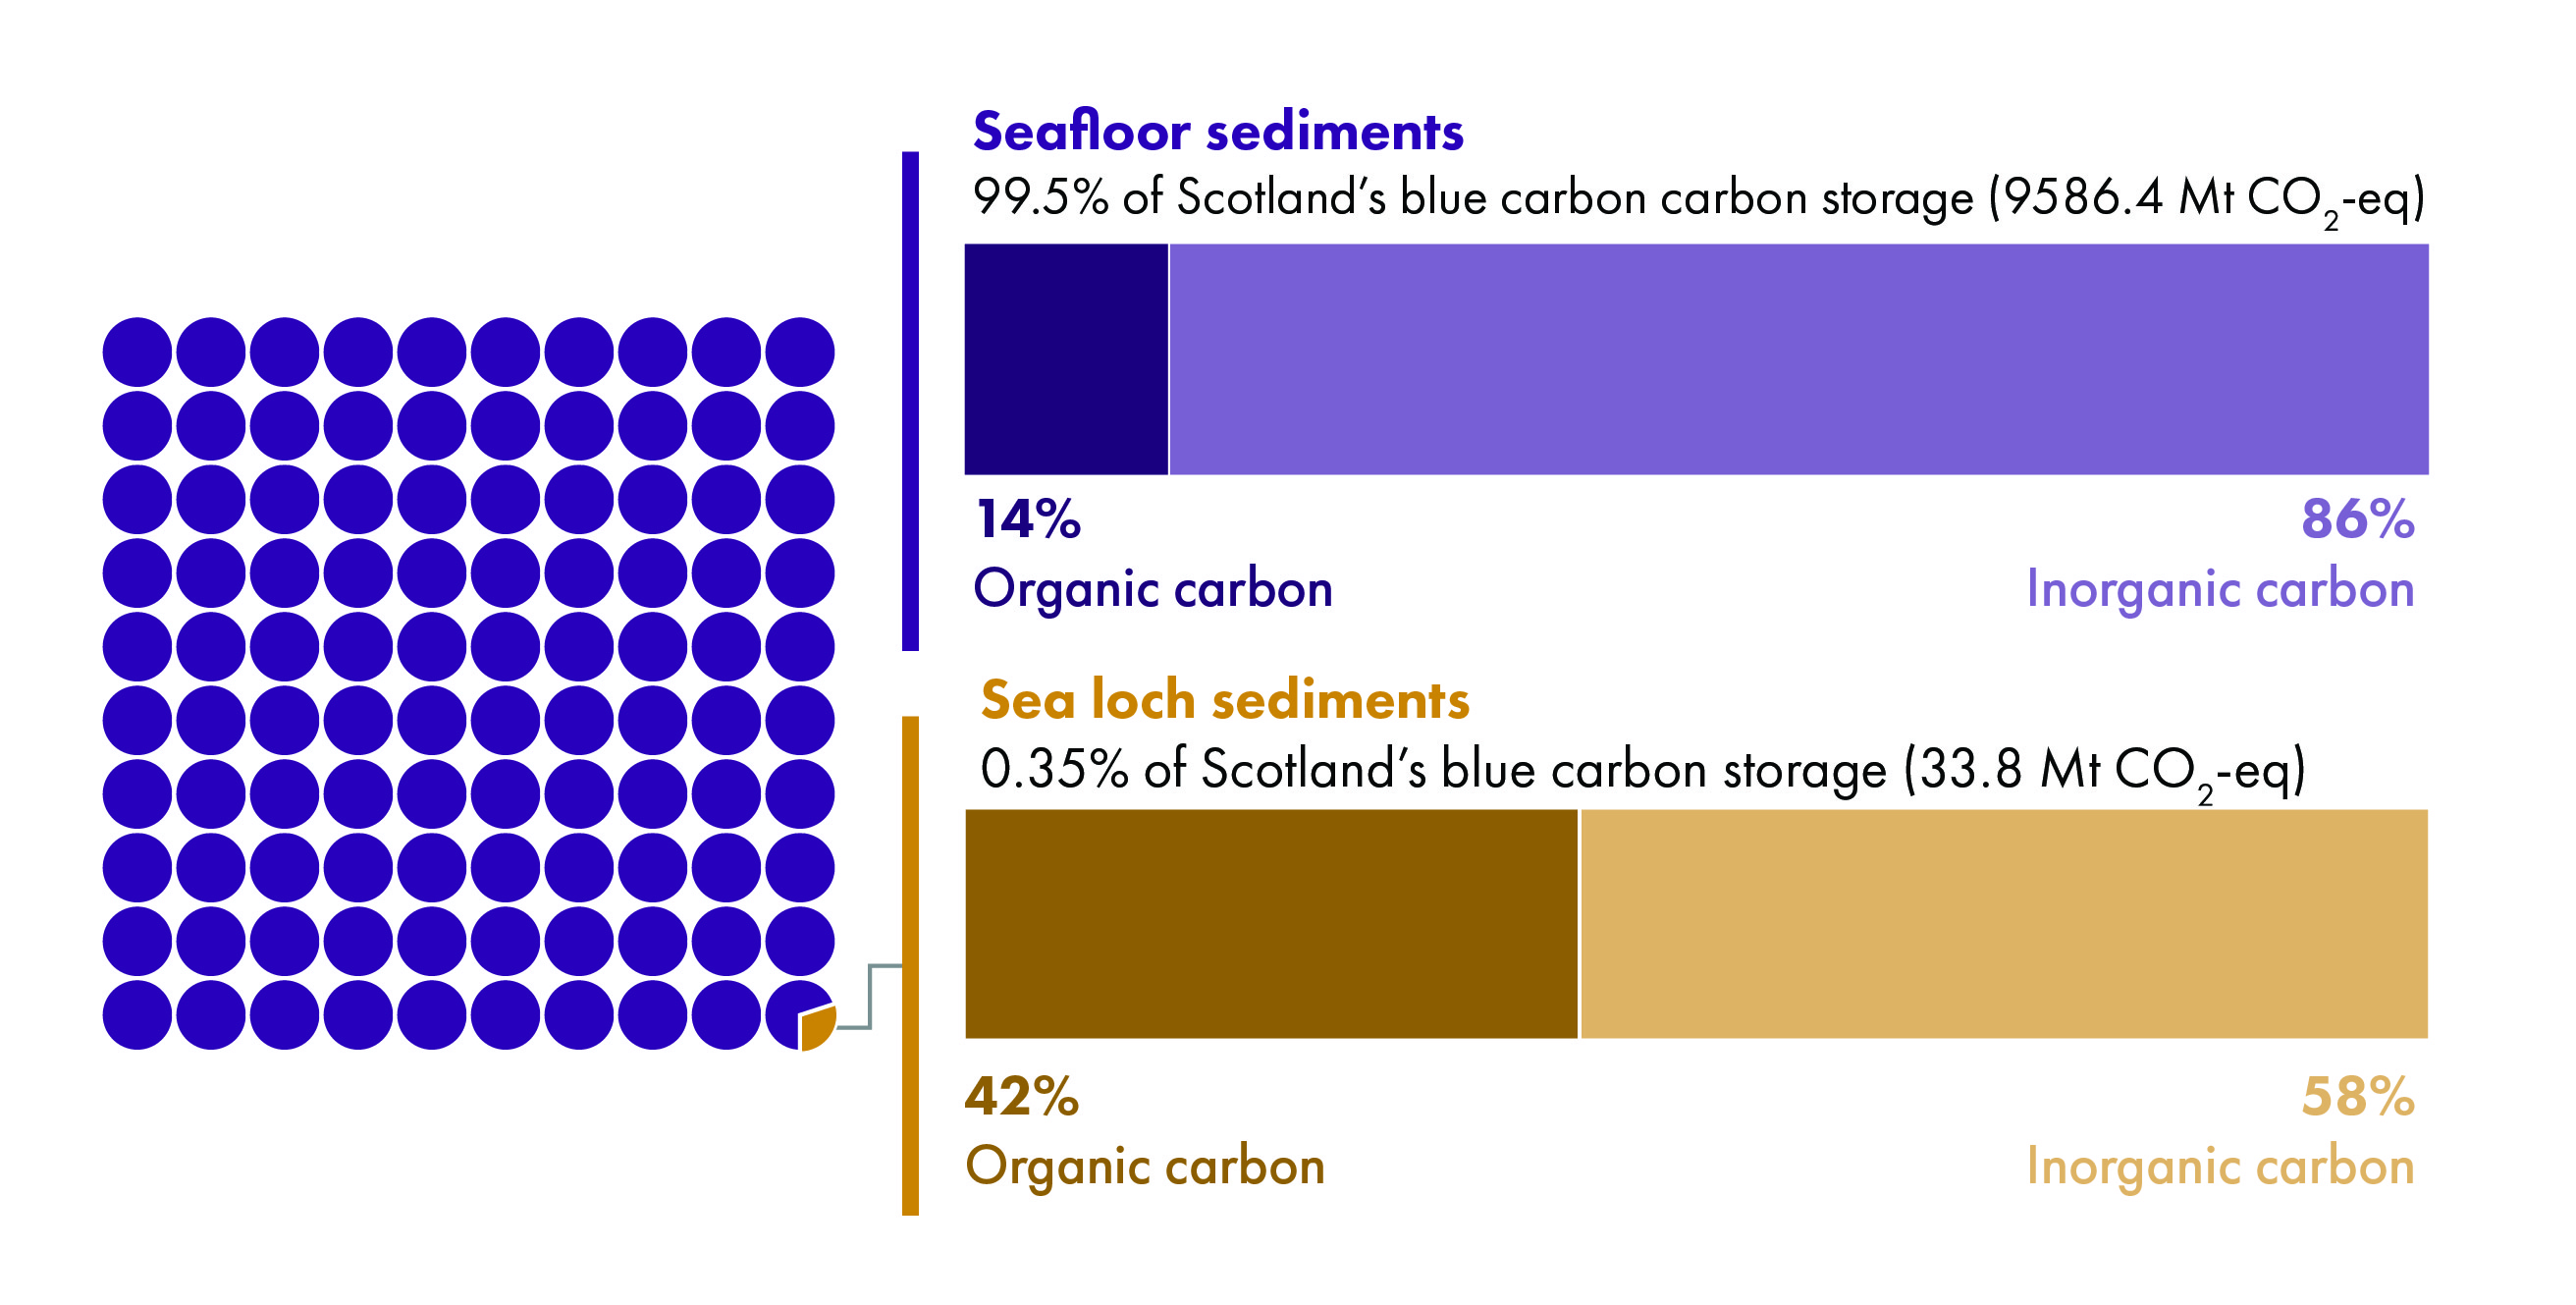 Figure showing the contribution of seafloor sediments (99.7%) and sea loch sediments (0.3%) to Scotland's total blue carbon storage. Bar plots showing that compositional makeup of the carbon in these stores, showing that sealoch sediments have a greater proportion of organic carbon (42%) compared with seafloor sediments (14%).